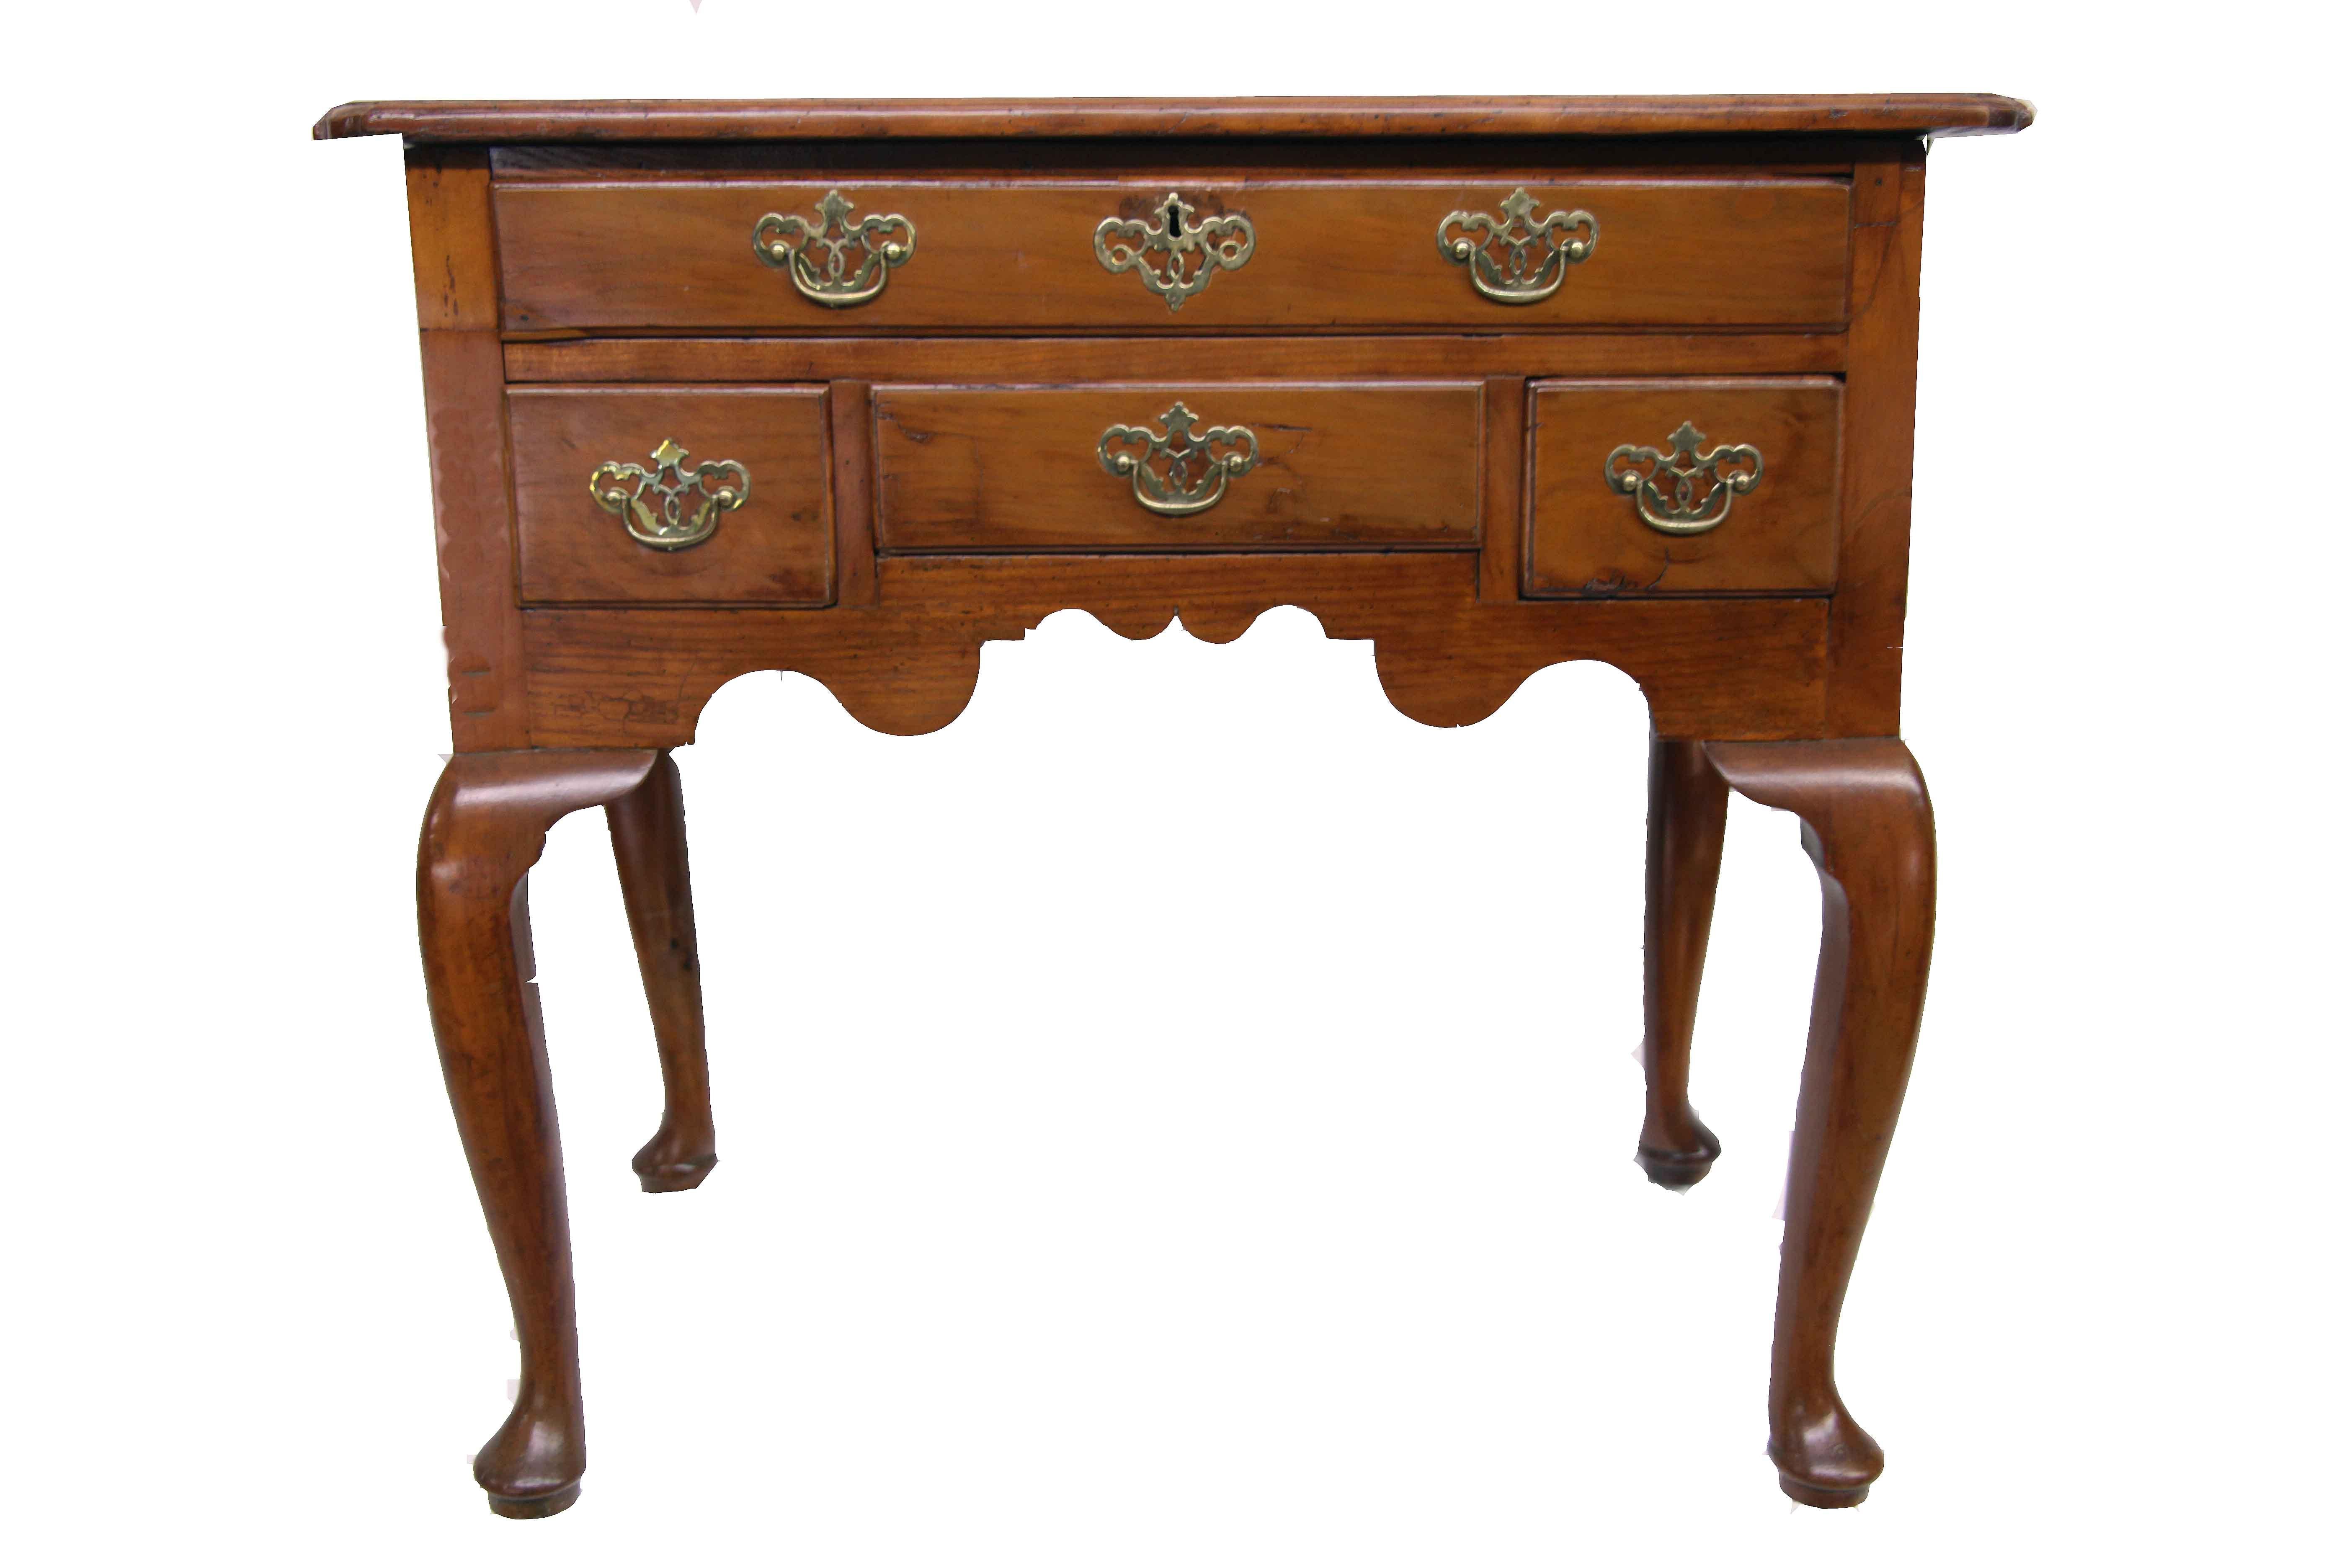  English Queen Anne Cherry Lowboy In Good Condition For Sale In Wilson, NC